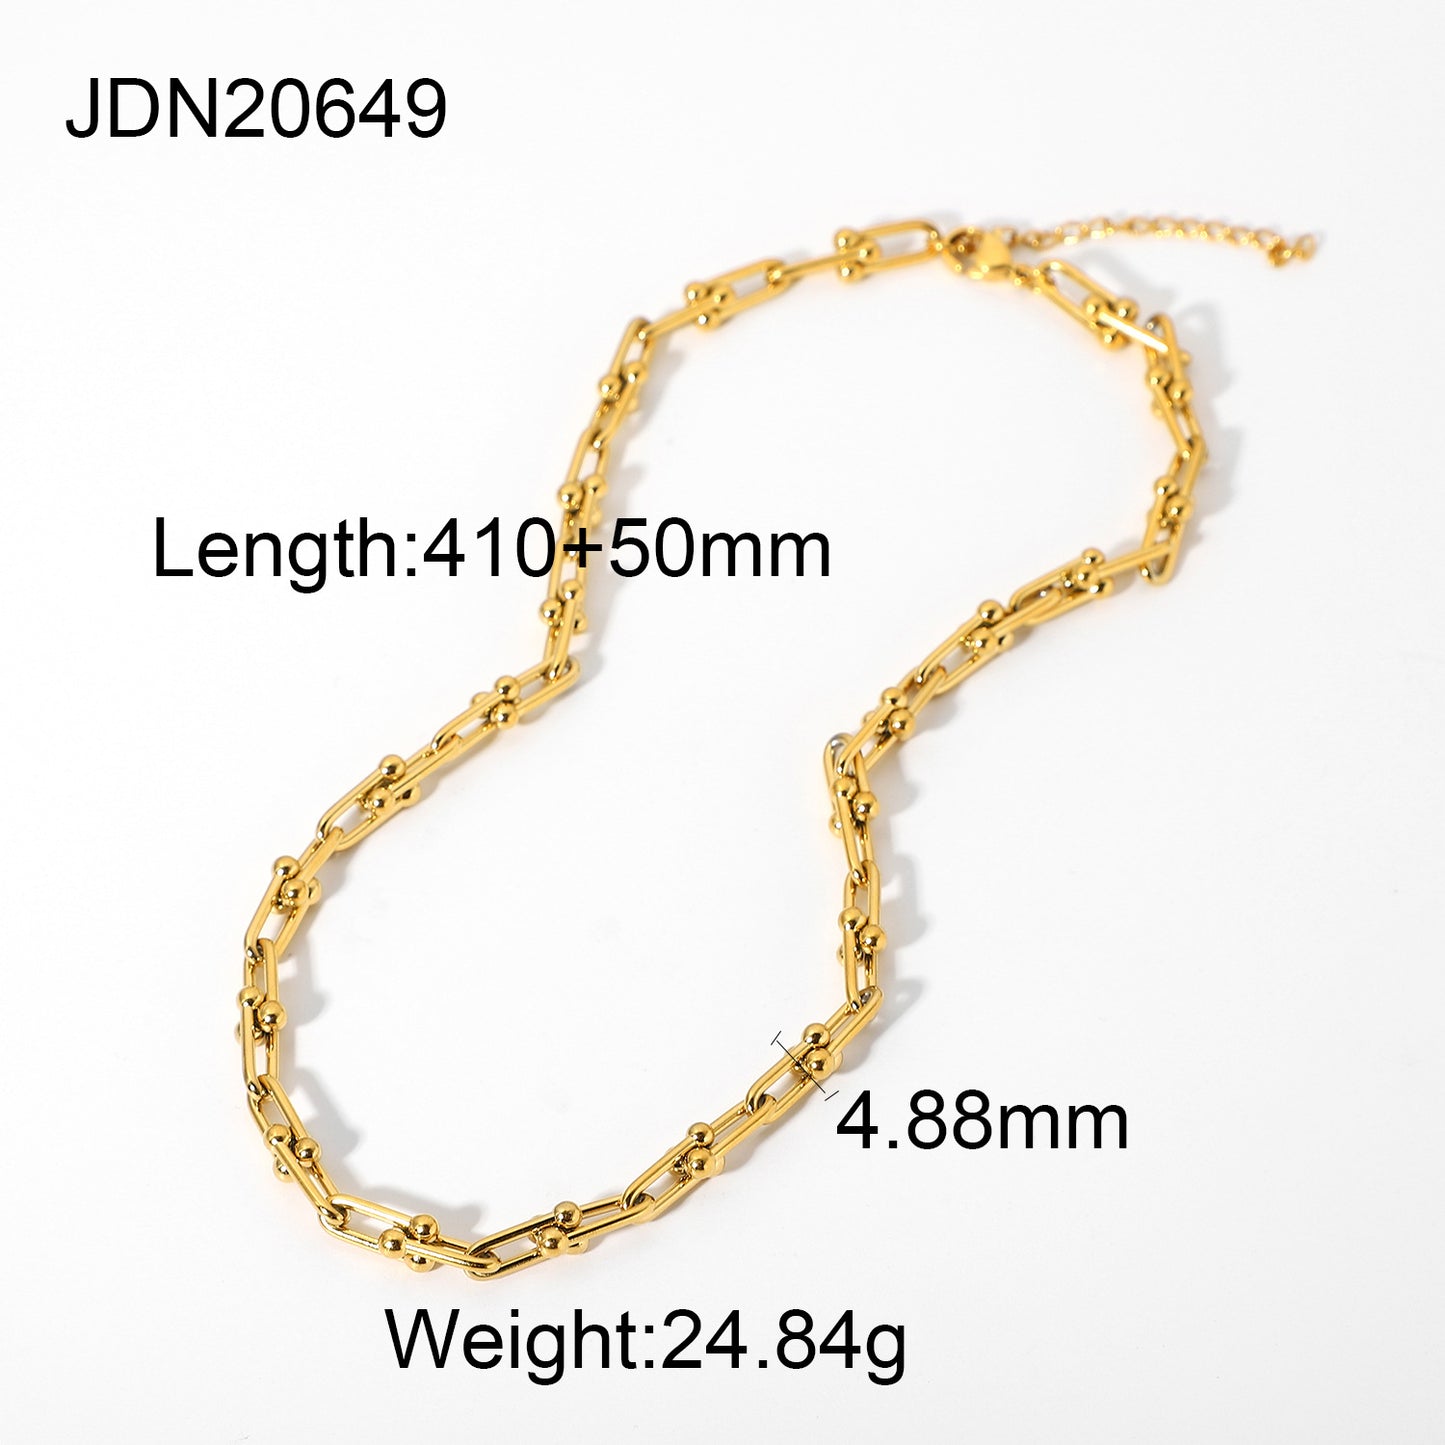 European And American Ins Rust-Free Waterproof Stainless Steel Fine Bead Necklace Necklace Women's Minimalist Fashion Ornament